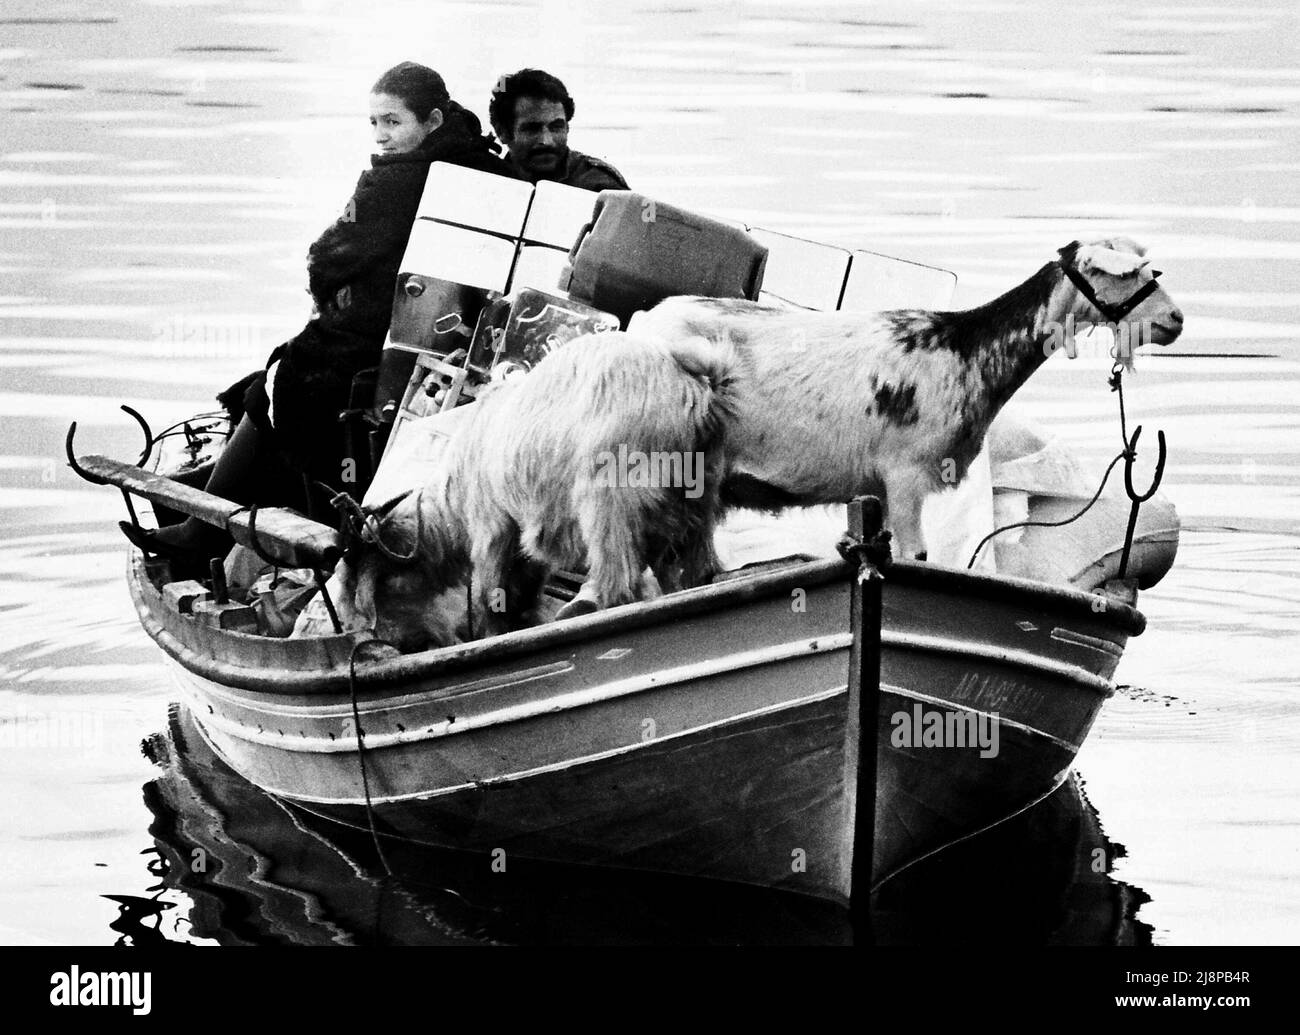 AJAXNETPHOTO. 1976. MELINA, GREECE. - GOAT A BOAT? - GOATS AND BOATS. THIS COUPLE - MOTHER IS CARRYING A BABY AND DAUGHTER IS HIDDEN BEHIND CANS - MOVED ALL THEIR BELONGINGS TO A NEW HOME ACROSS 5 MILES OF WATER IN ONE TRIP.  PHOTO:JONATHAN EASTLAND/AJAXREF:761511 1 26 Stock Photo